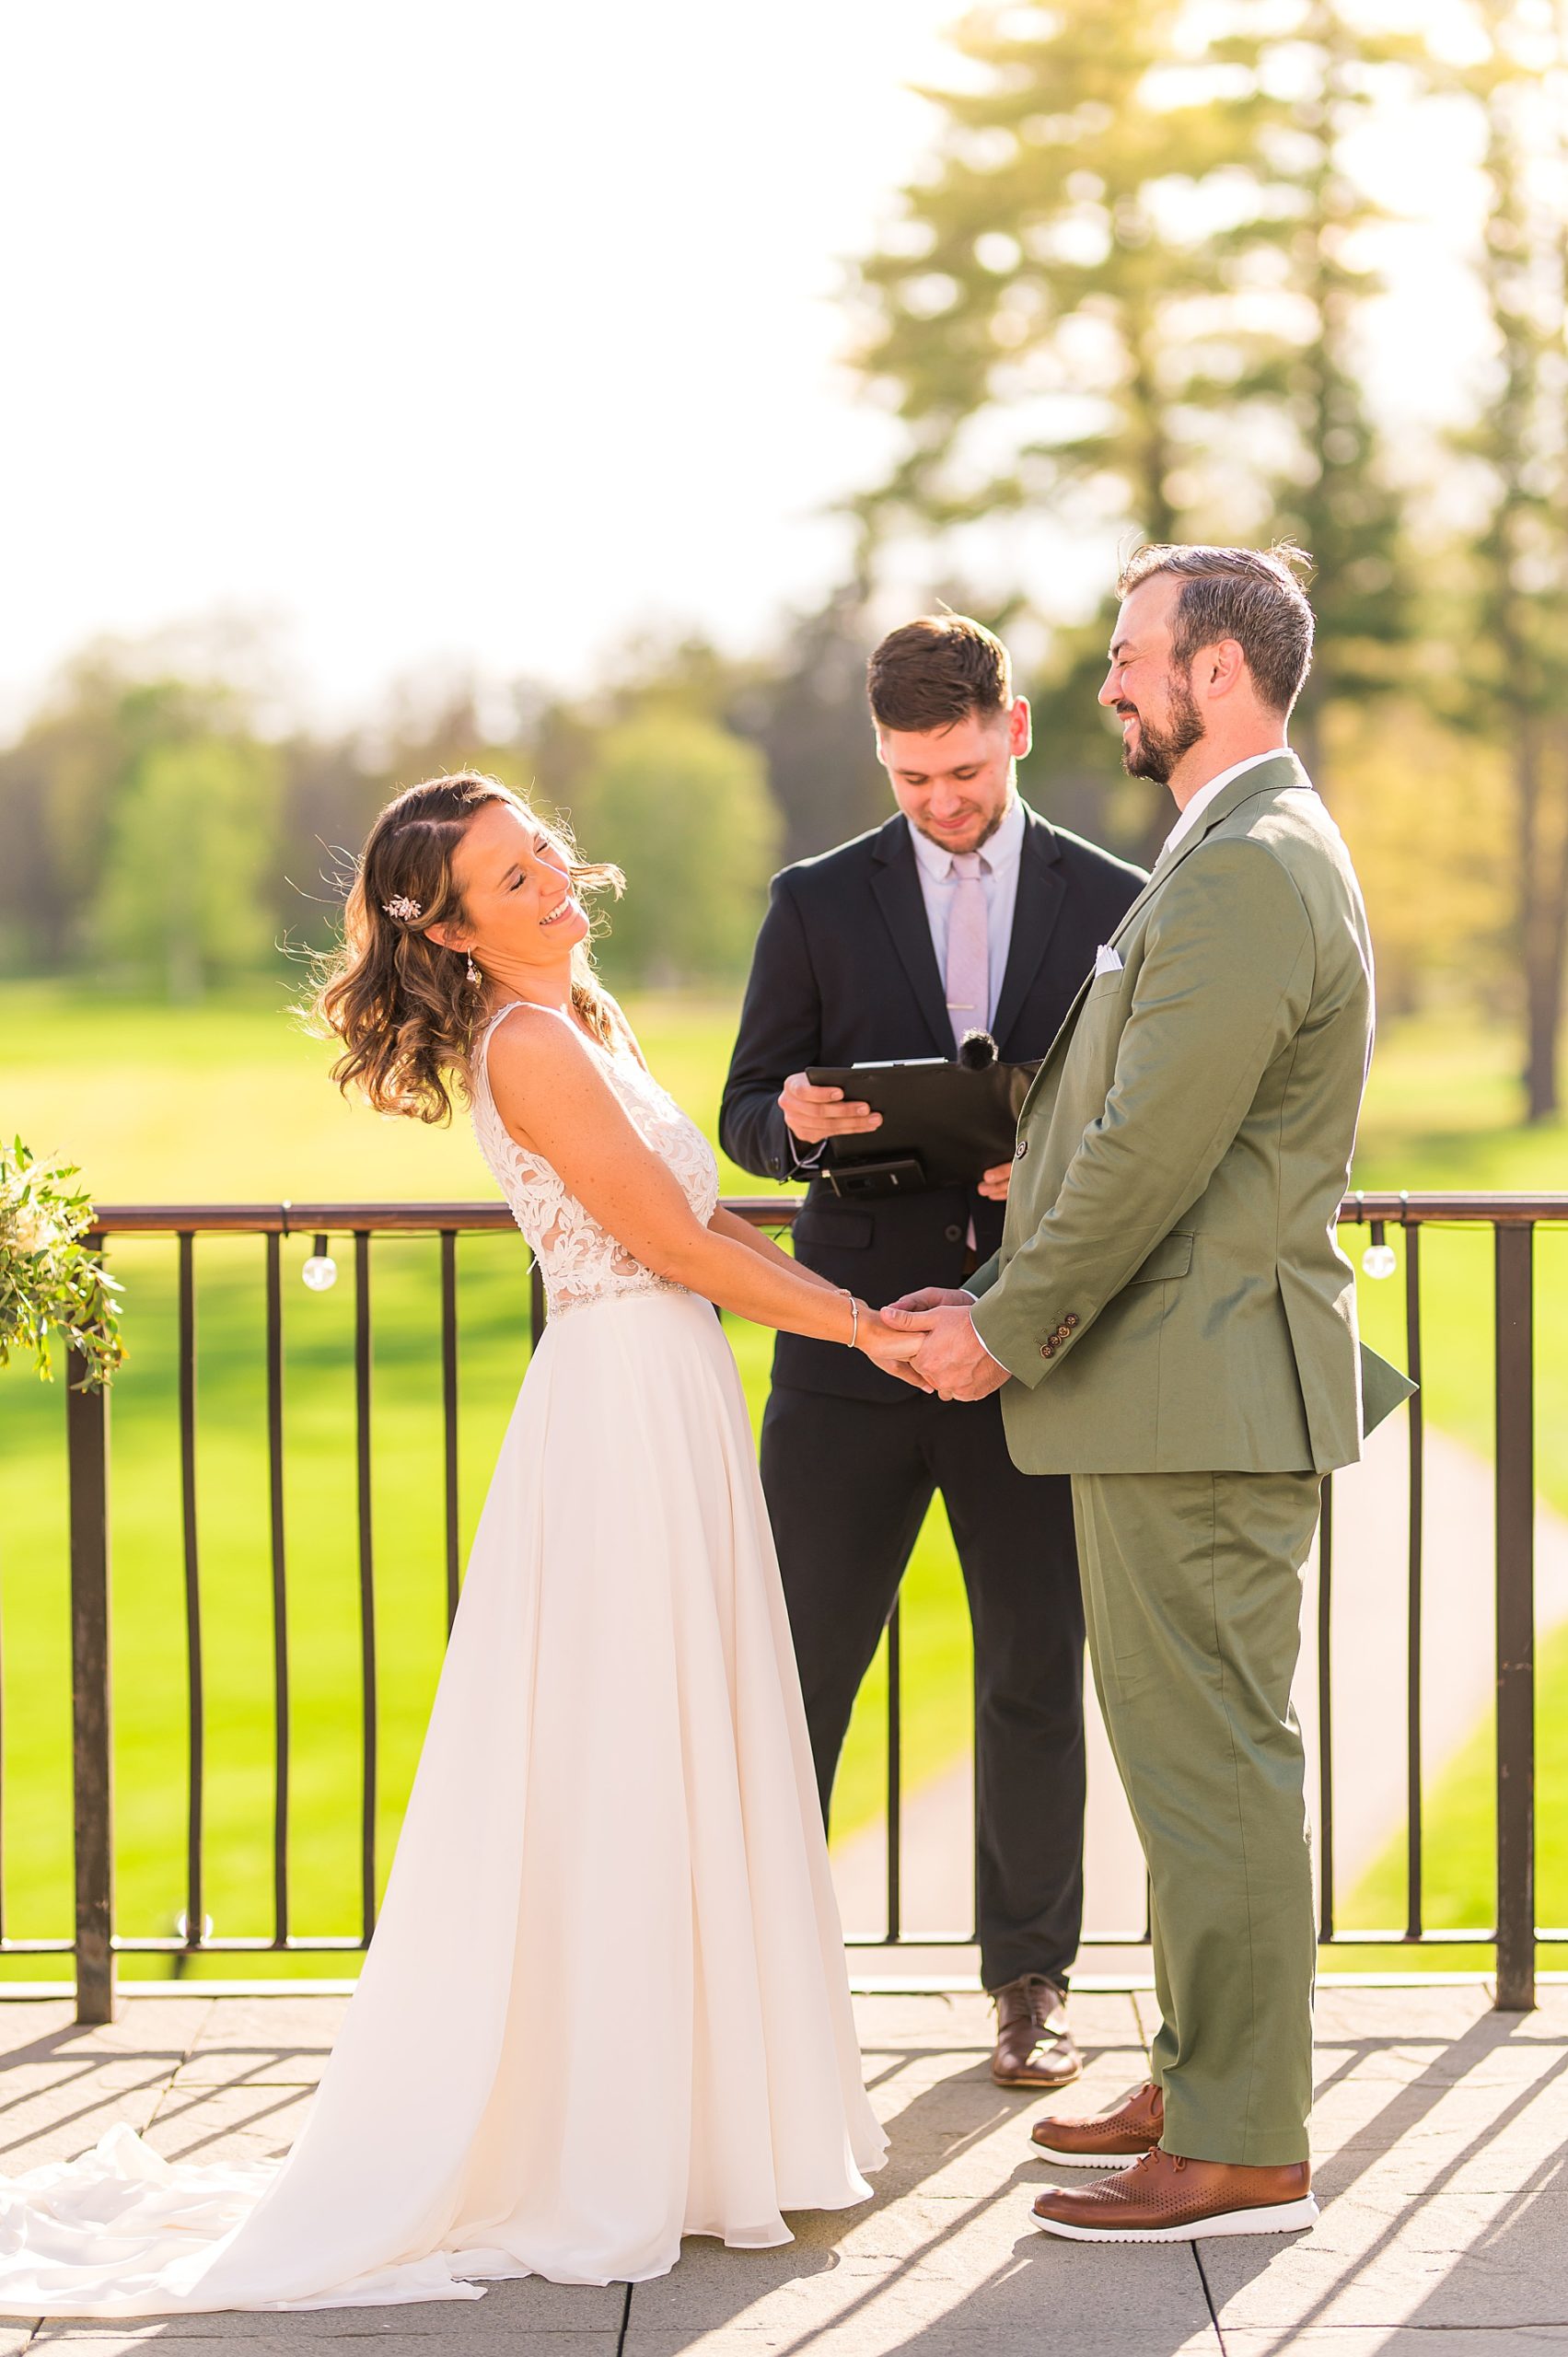 couple share laughter during wedding ceremony